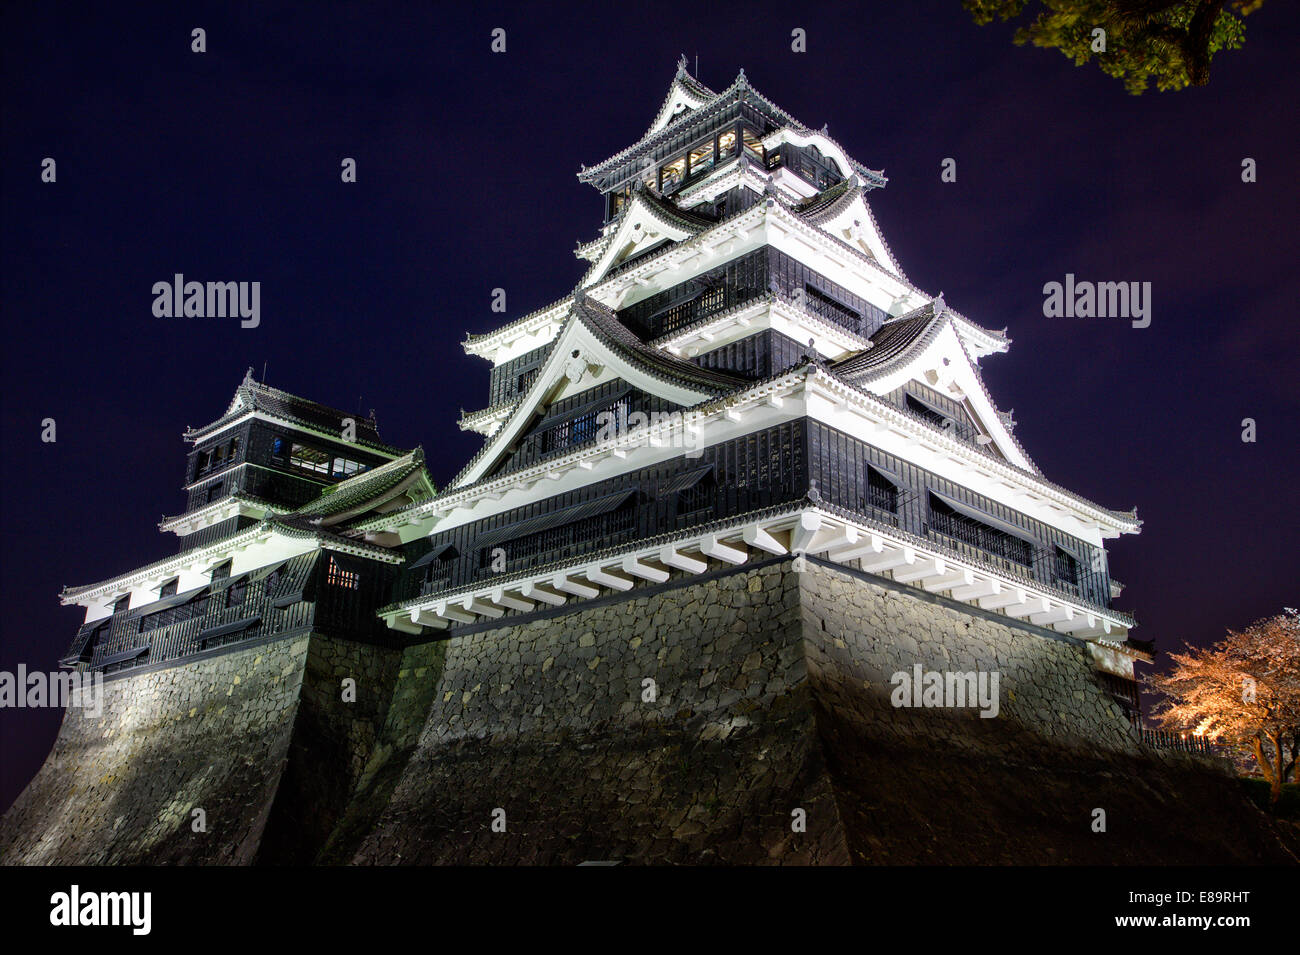 Pre 2016 earthquake, the massive double keep of Kumamoto castle in Japan illuminated at night with springtime cherry blossoms in front. Stock Photo